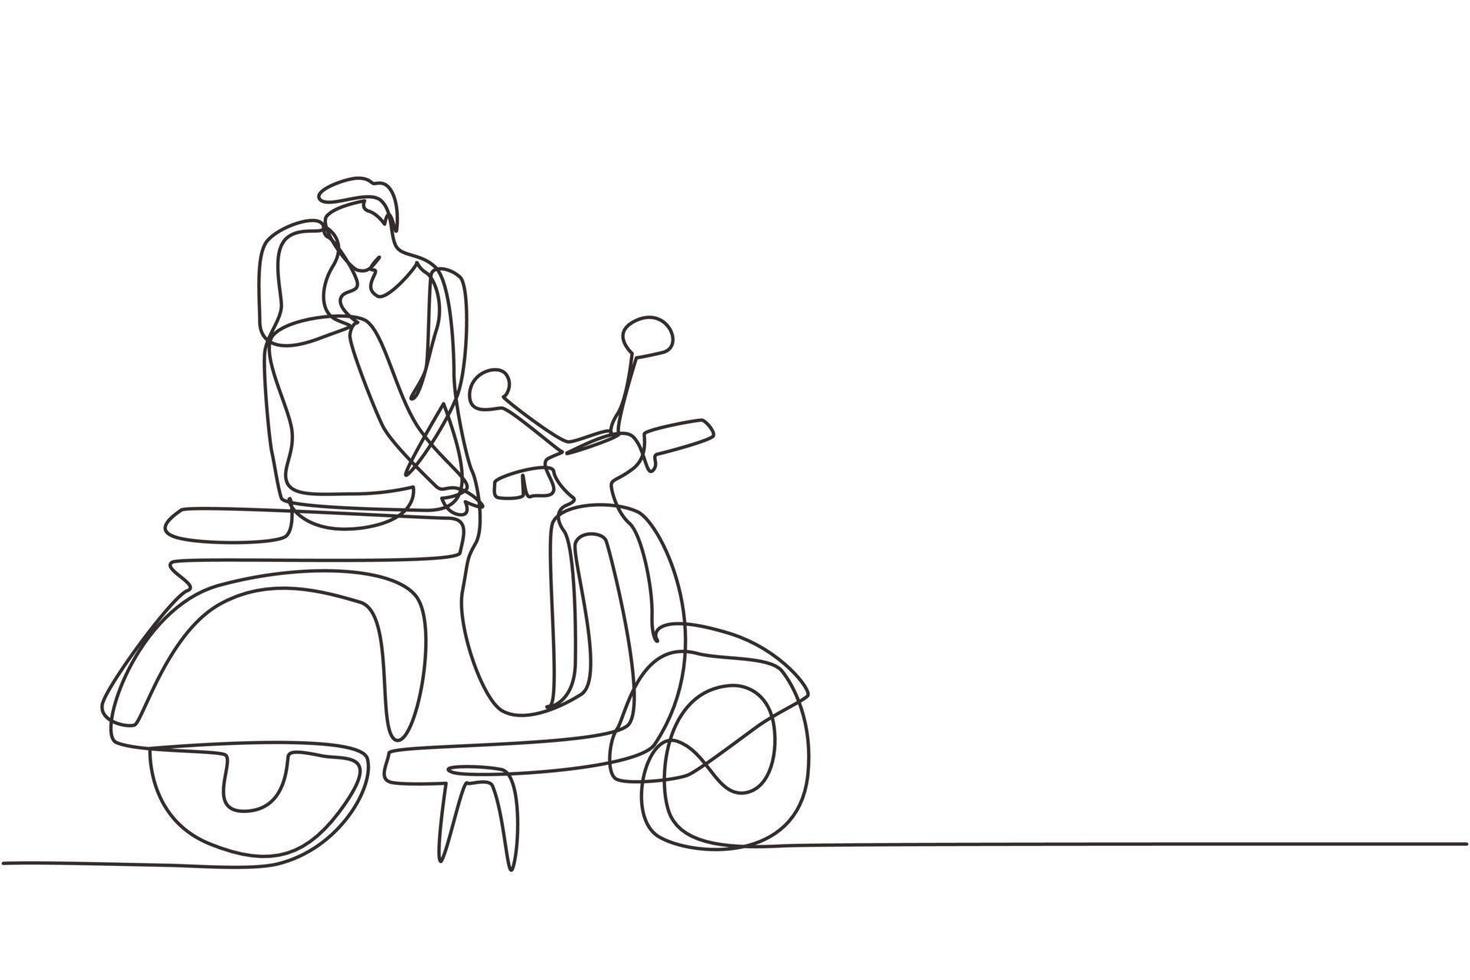 Single continuous line drawing couple on date outdoors, girlfriend and boyfriend with motorcycle, amorous relationship. Romantic road trip, journey. One line draw graphic design vector illustration